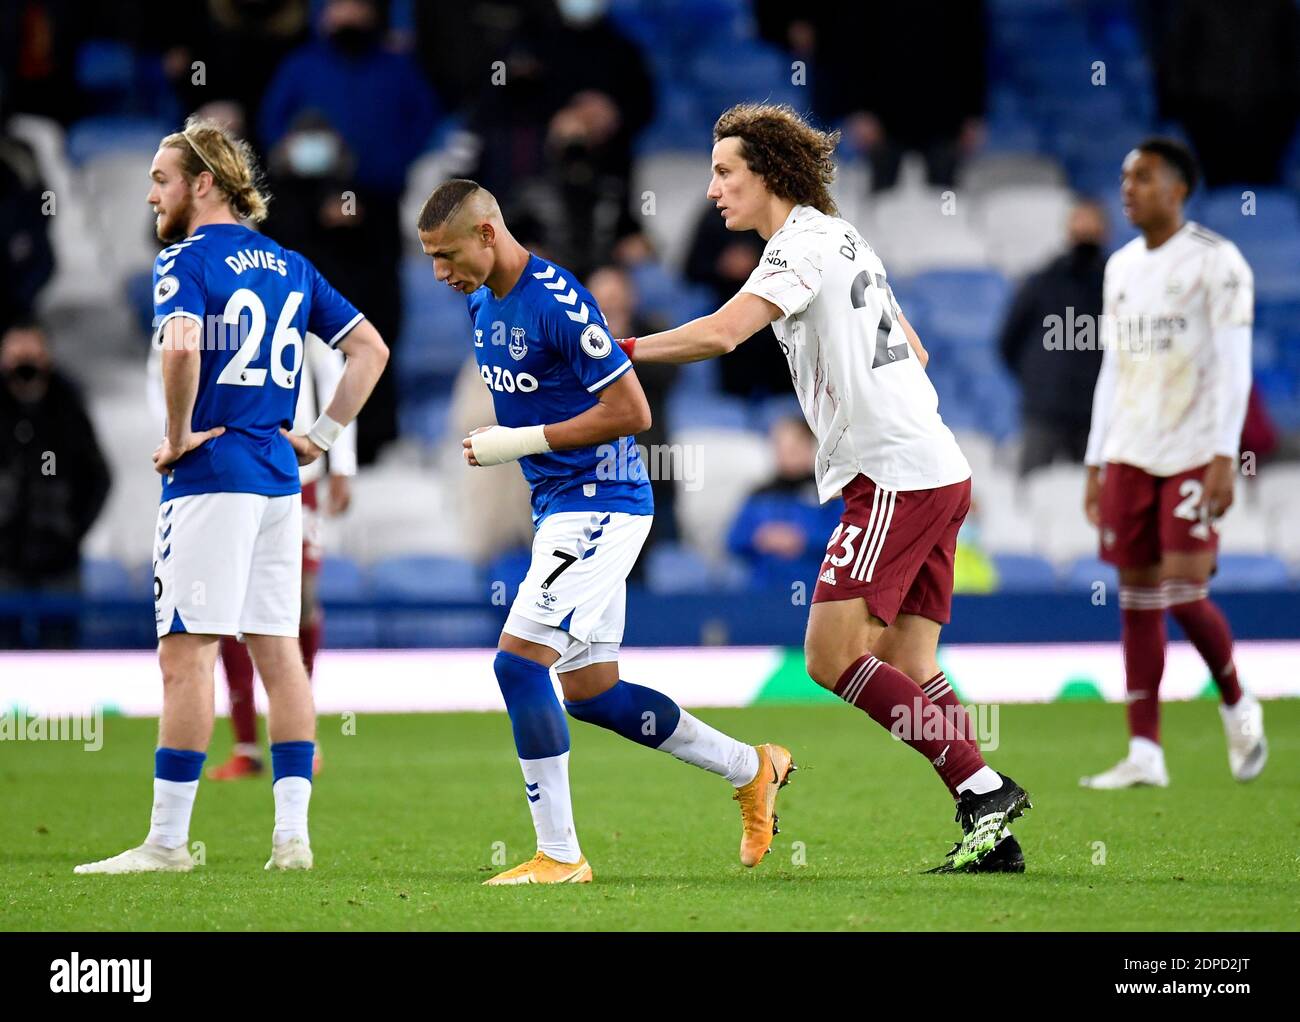 Arsenal's David Luiz (right) pushes Everton's Richarlison to leave the pitch during the Premier League match at Goodison Park, Liverpool. Stock Photo